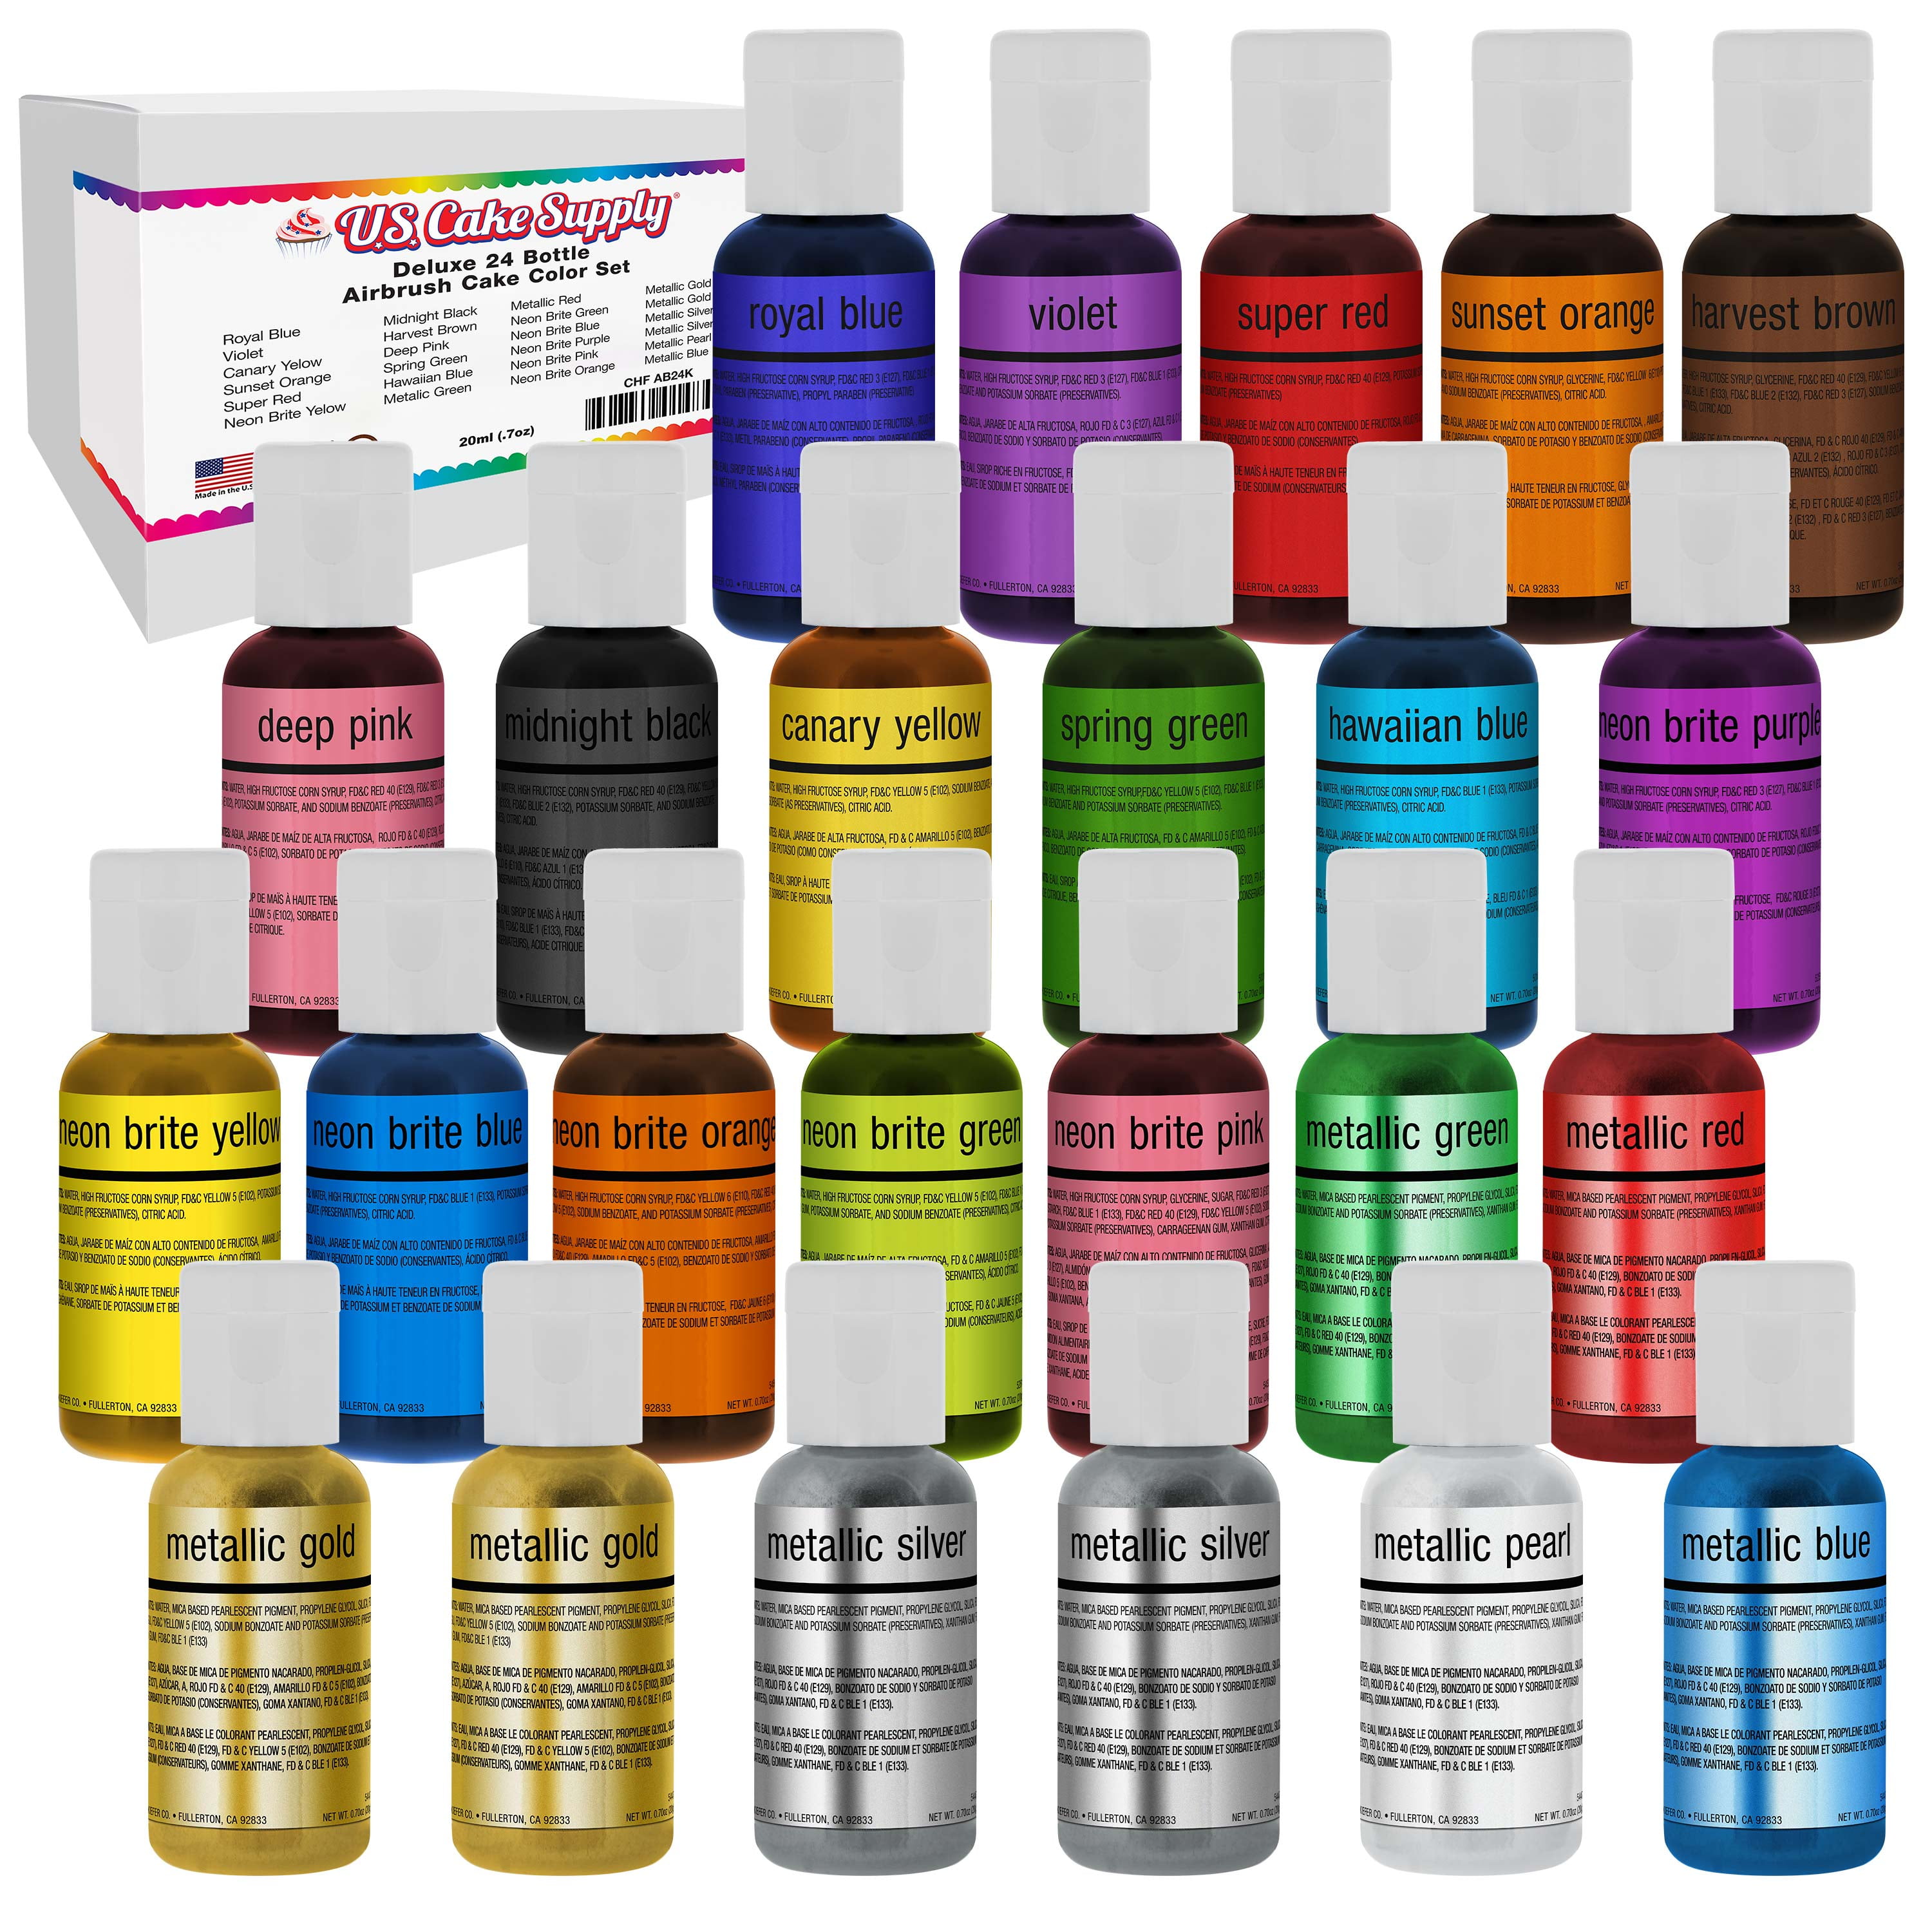 US Cake Supply by Chefmaster Airbrush Cake Neon Color Set - The 6 Most Popular Neon Colors in 0.7 fl. oz. (20ml) Bottles